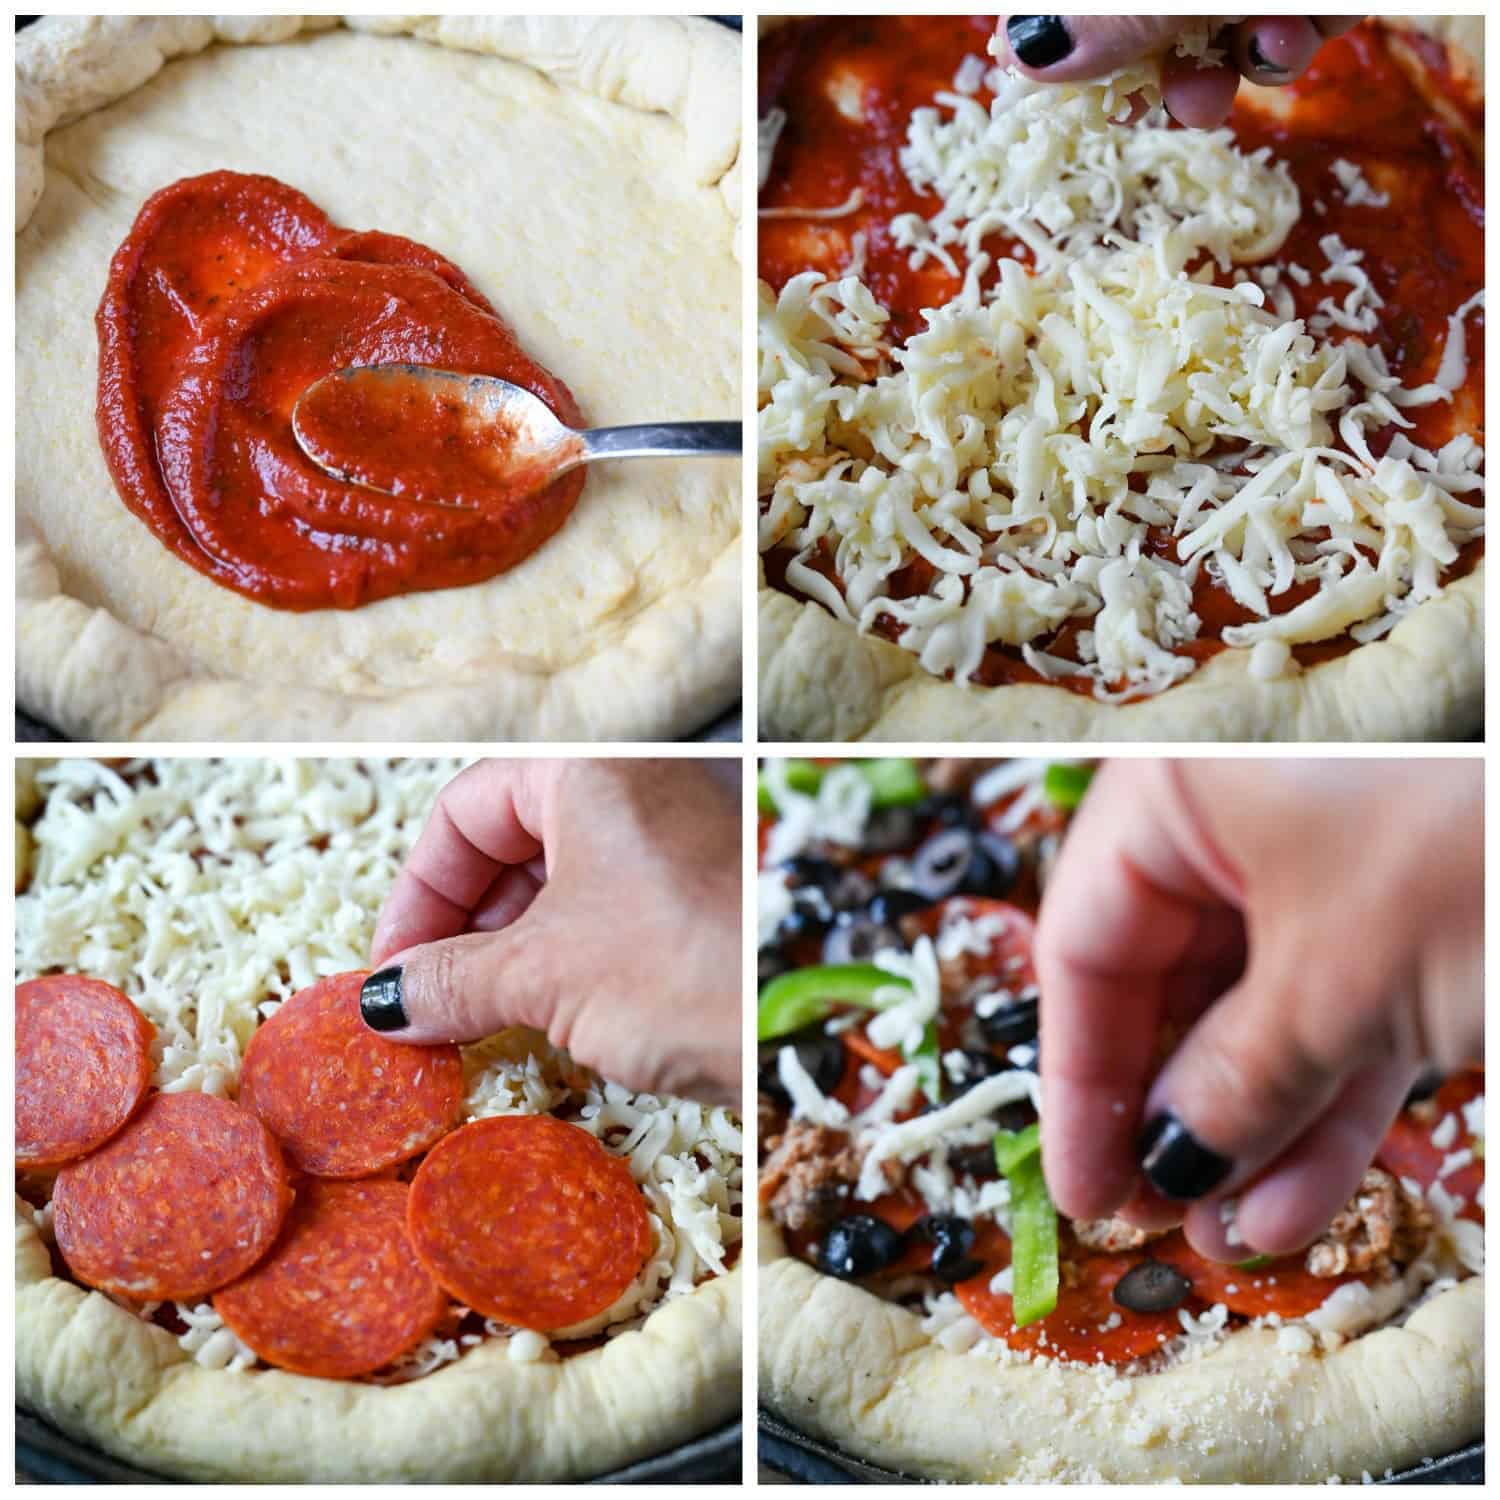 Four steps to putting a skillet pizza together. First, spreading pizza sauce on the crust. Second, sprinkling shredded cheese on top of sauce. Third, adding pepperoni topping. Fourth, sprinkling grated parmesan cheese on the edge of the crust.